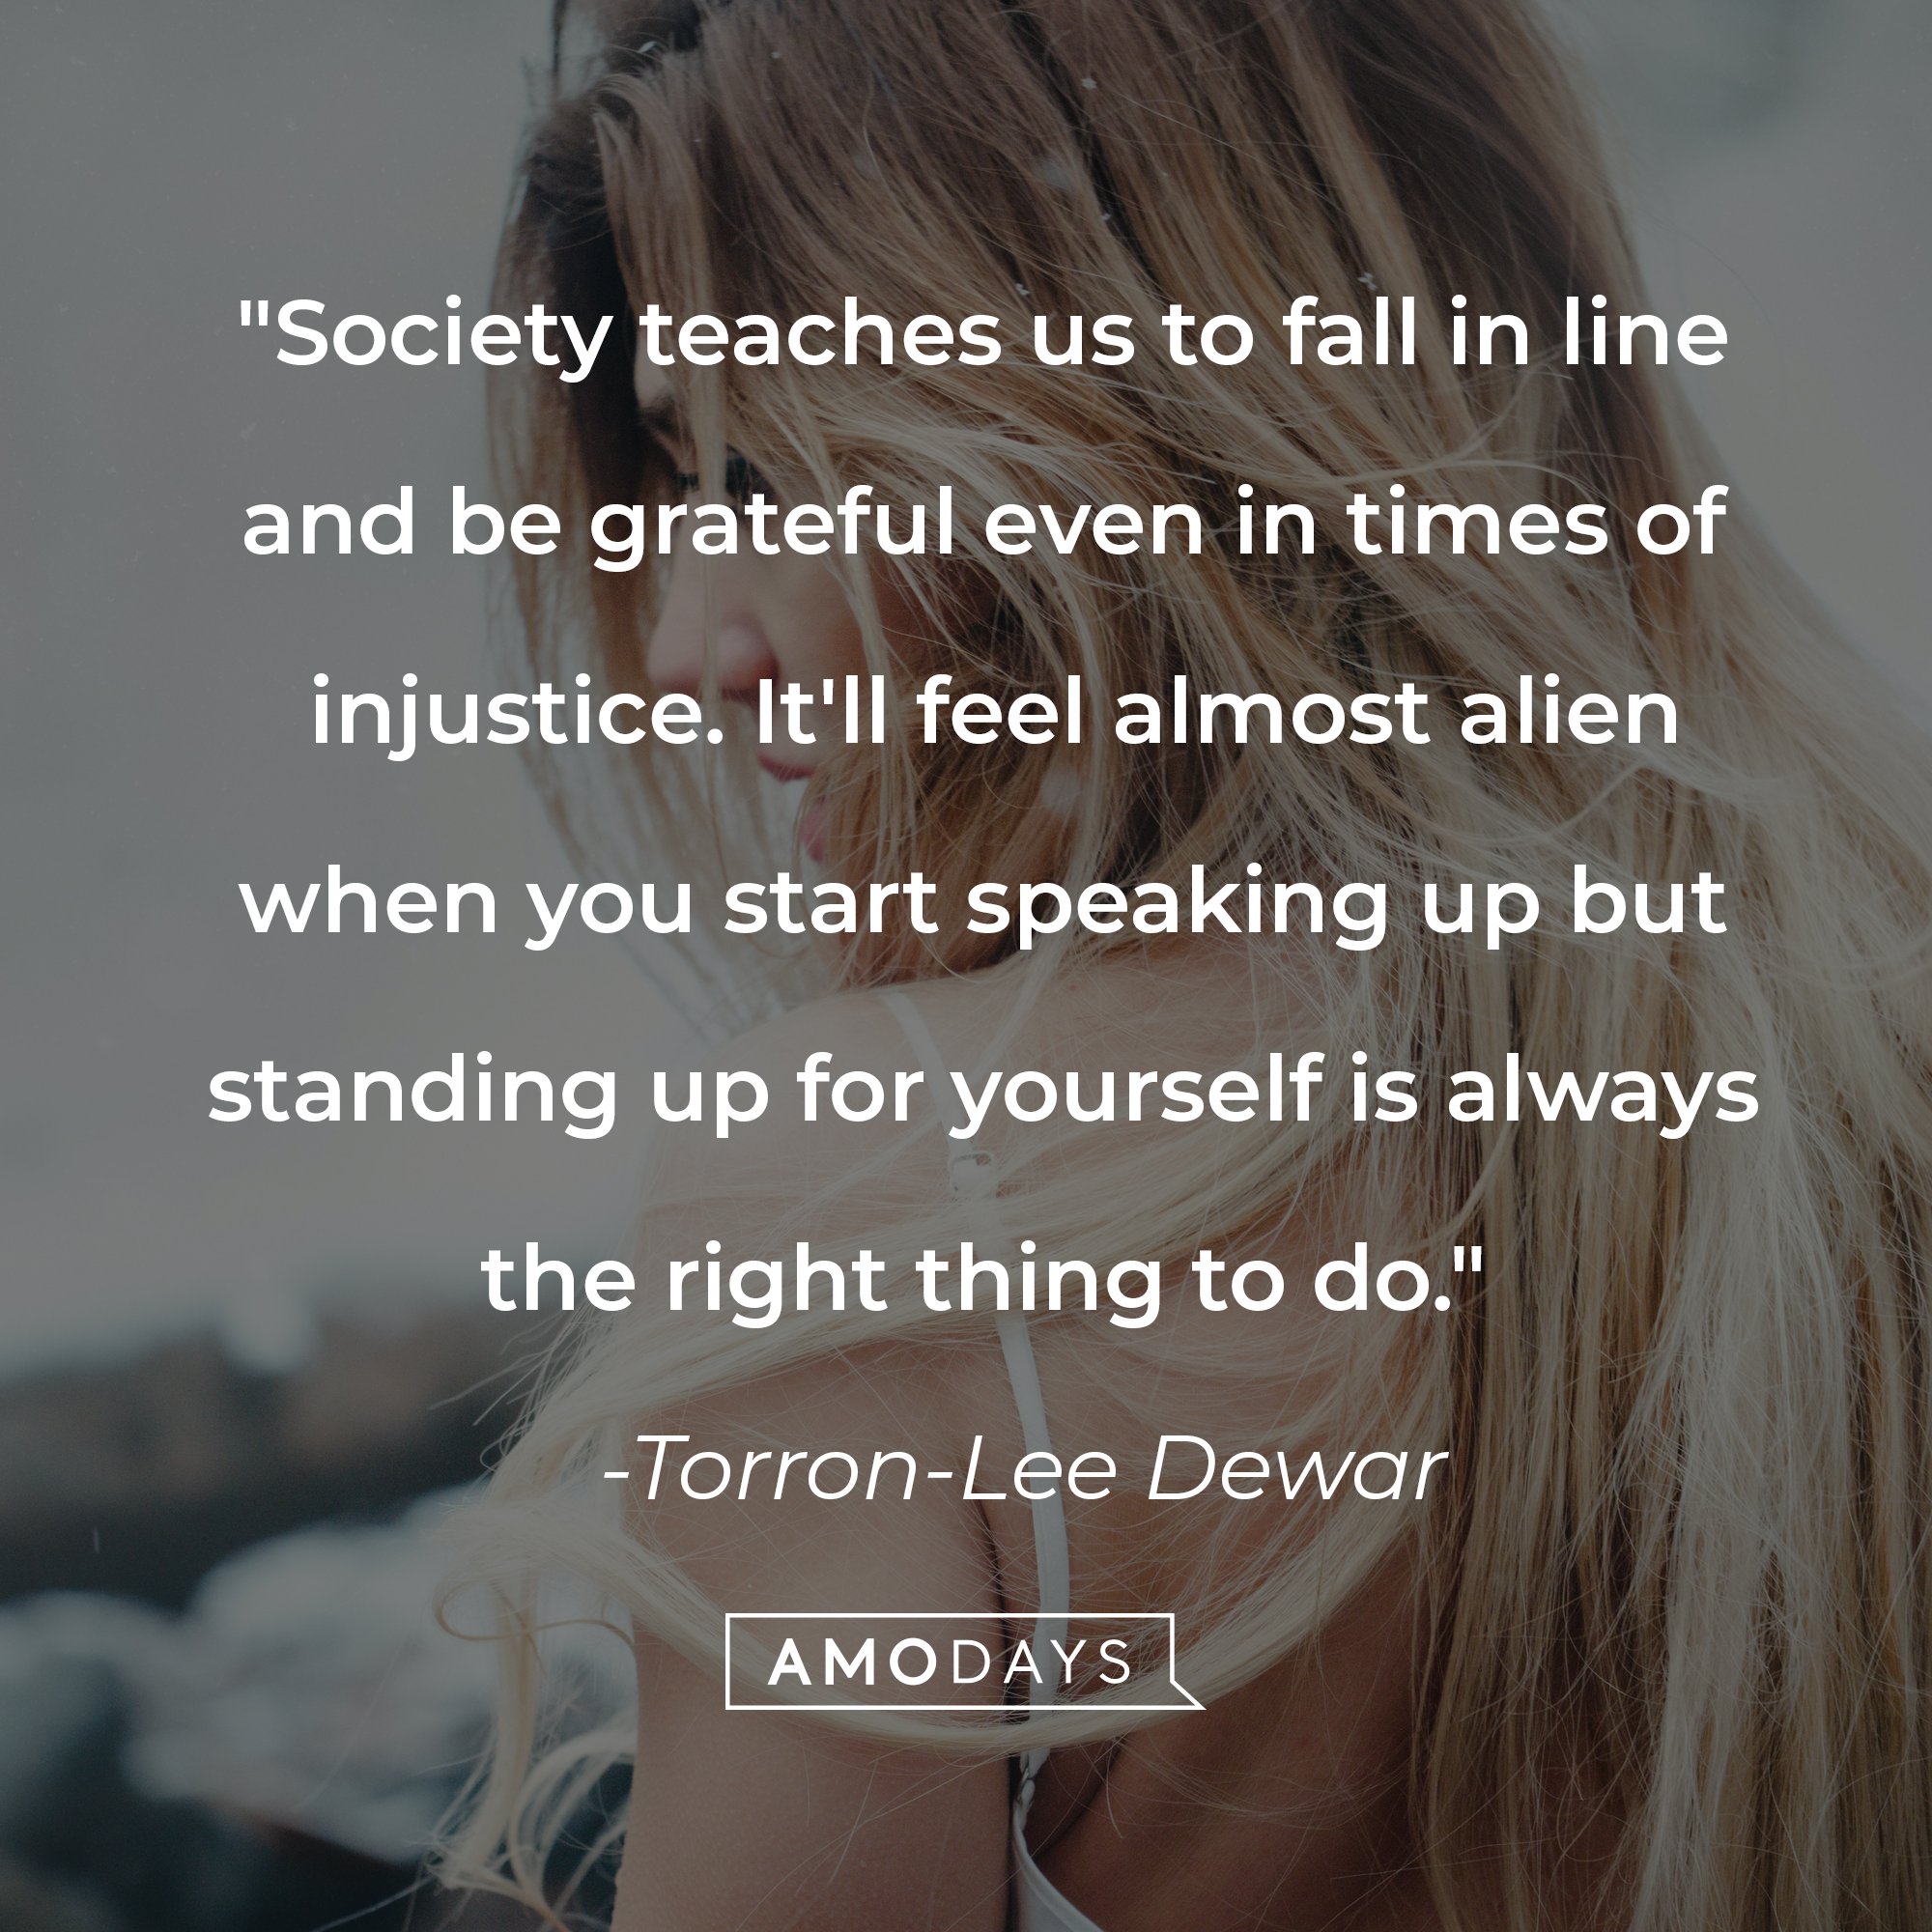 Torron-Lee Dewar's quote: "Society teaches us to fall in line and be grateful even in times of injustice. It'll feel almost alien when you start speaking up but standing up for yourself is always the right thing to do." | Image: AmoDays